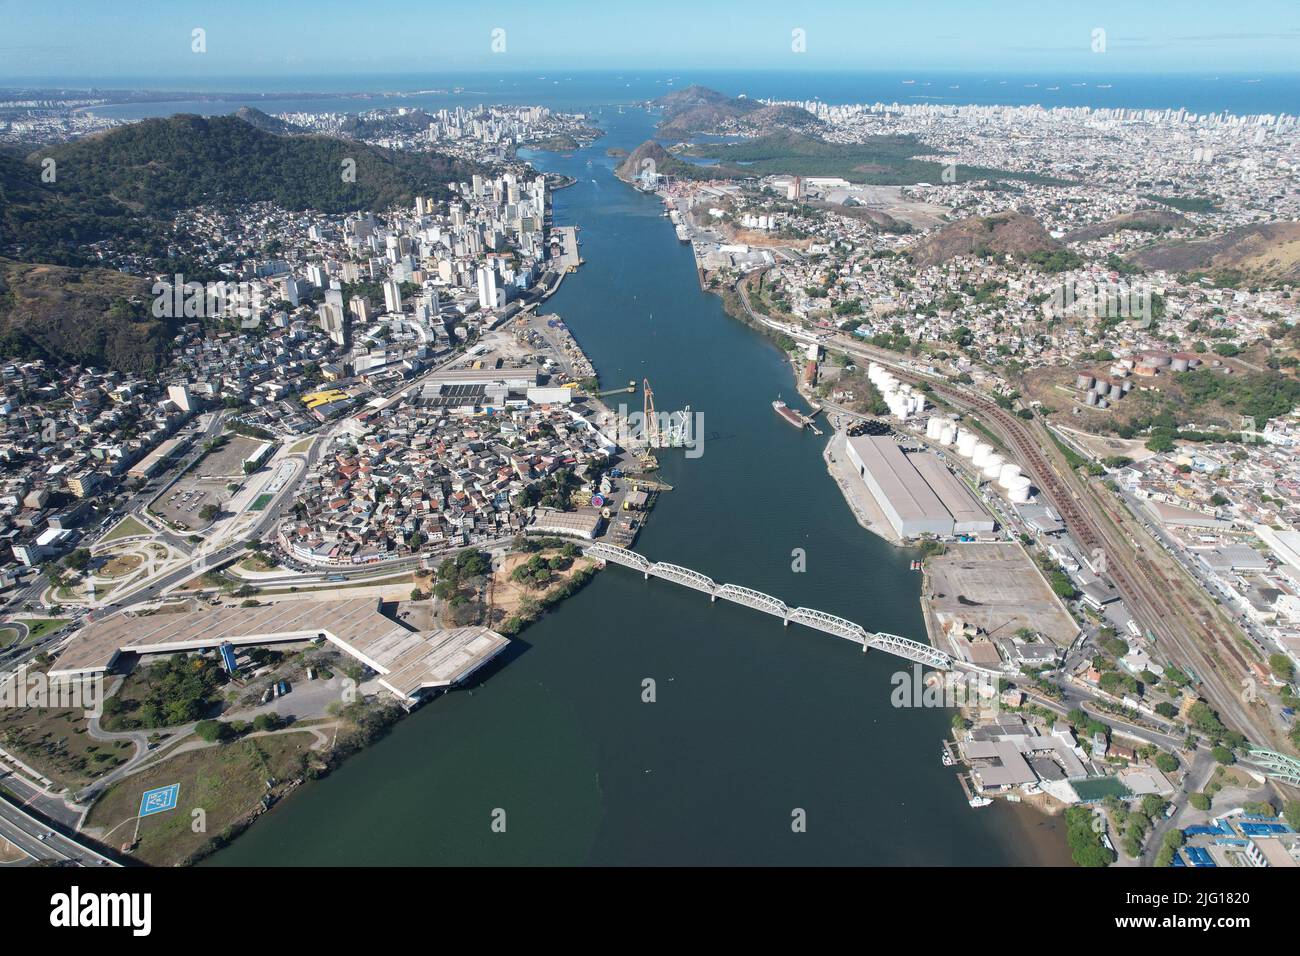 View of the bay of the city of Vitória - Brazil Stock Photo